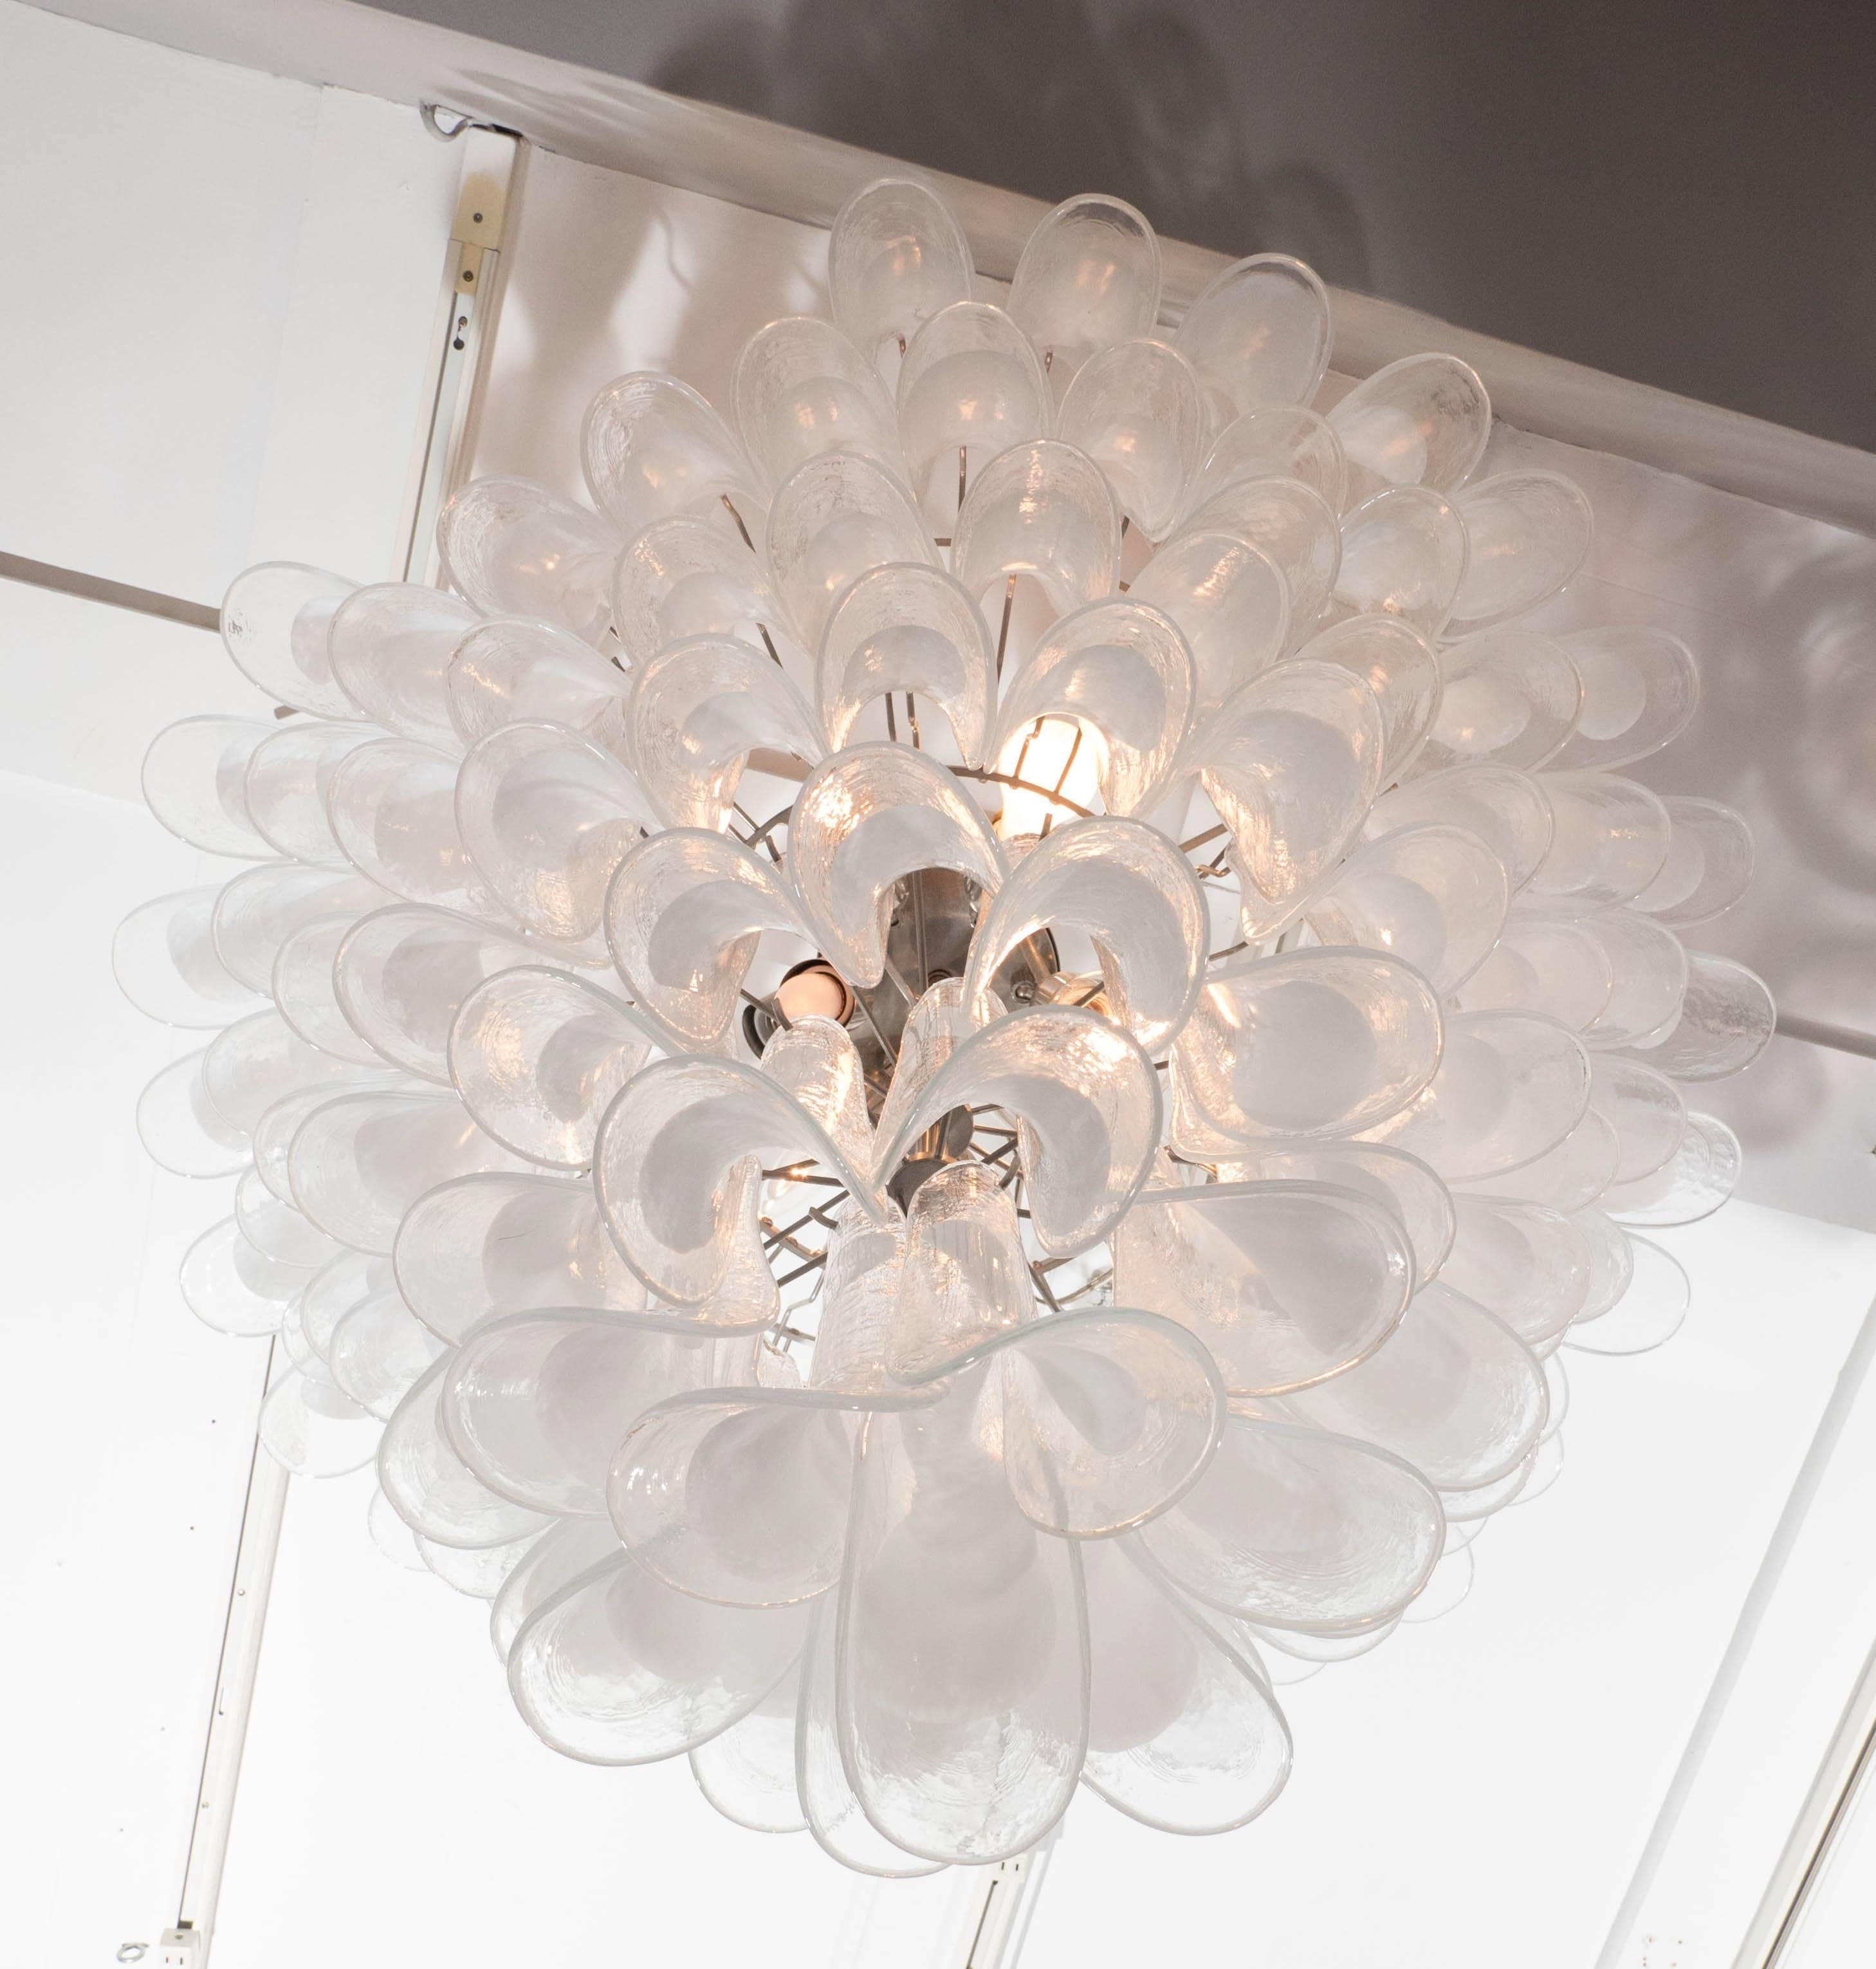 Contemporary Huge Mazzega White and Clear Glass Petal Chandeliers, 2 of 2 (Remaining Balance)